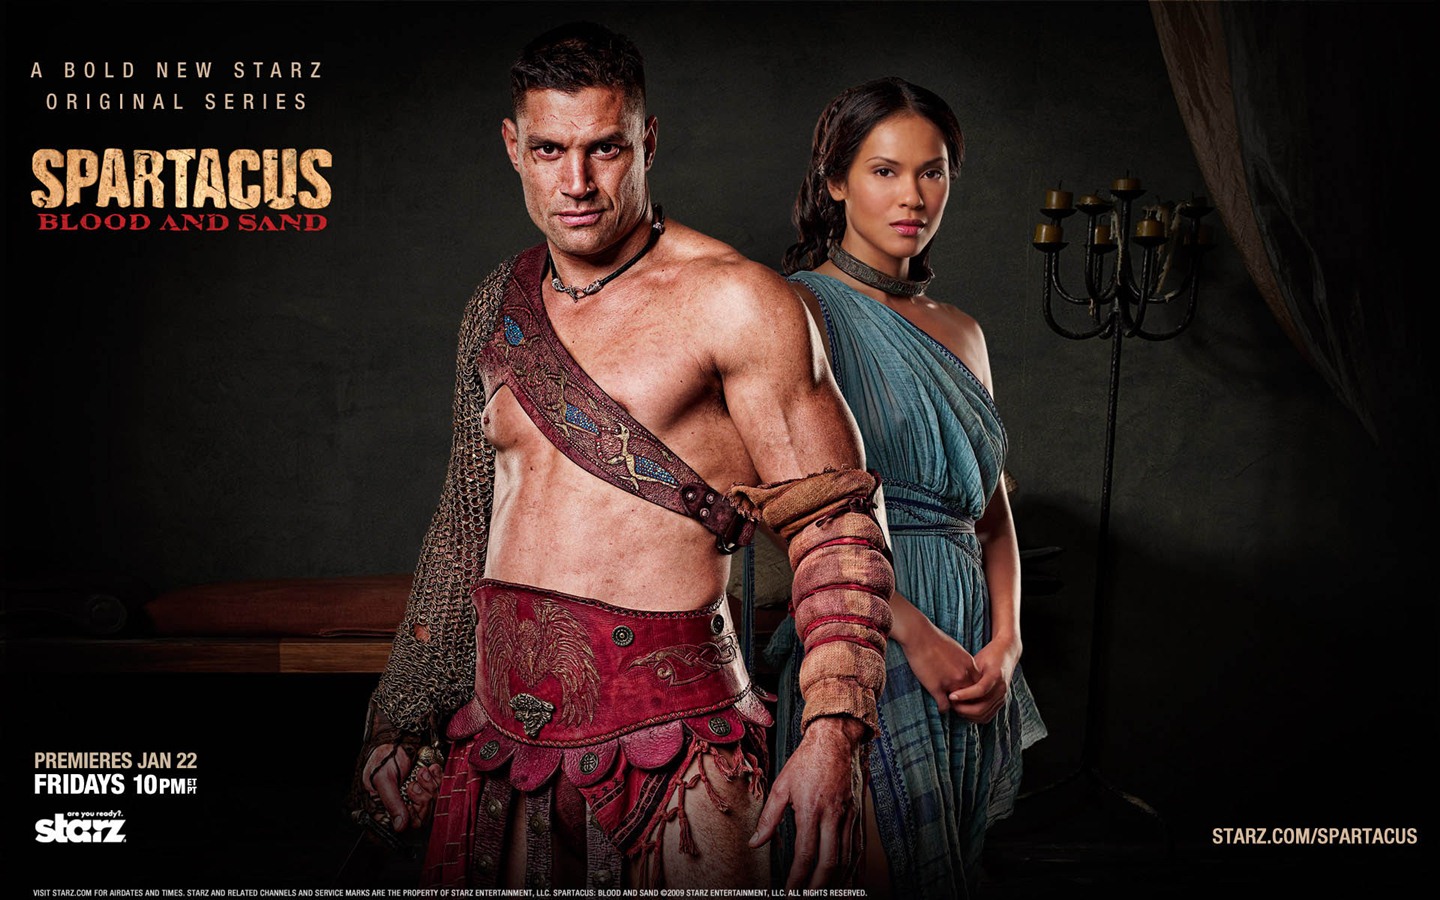 Spartacus: Blood and Sand HD wallpapers #4 - 1440x900